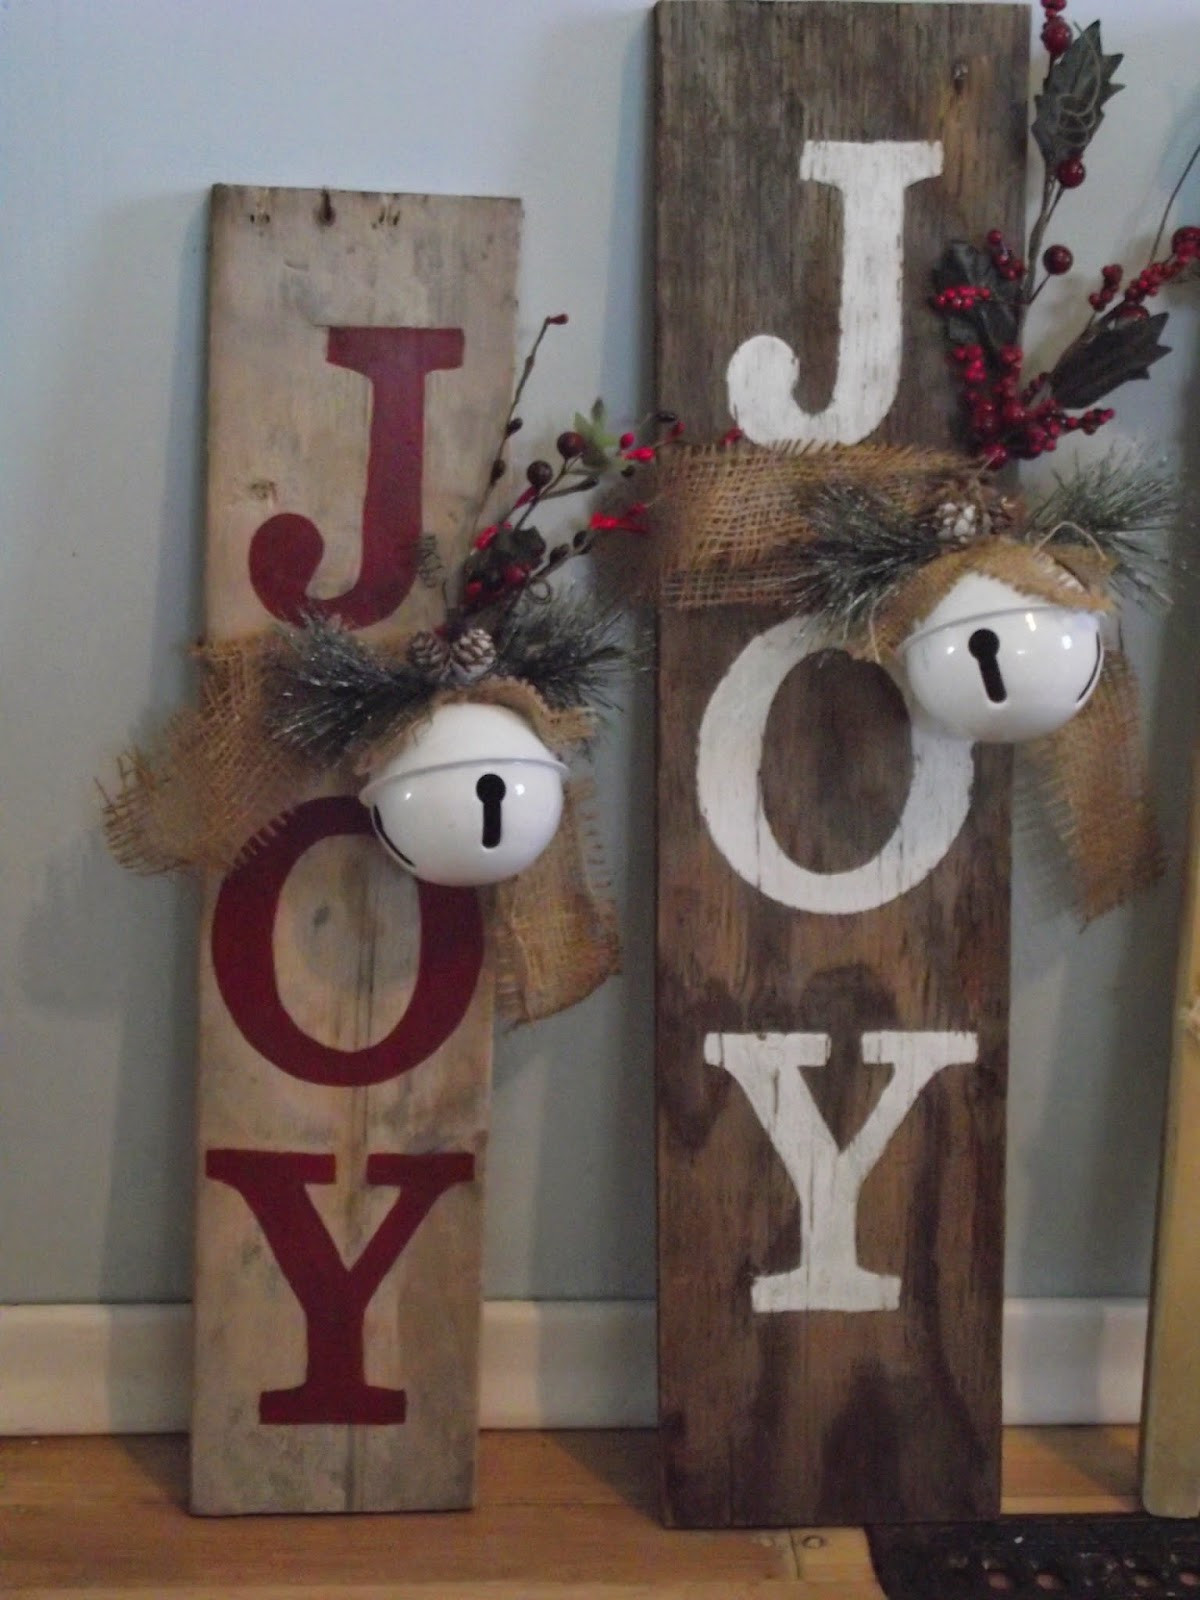 Wood Craft Ideas To Make
 Country Mom at Home Christmas Crafts A Sneak Peak